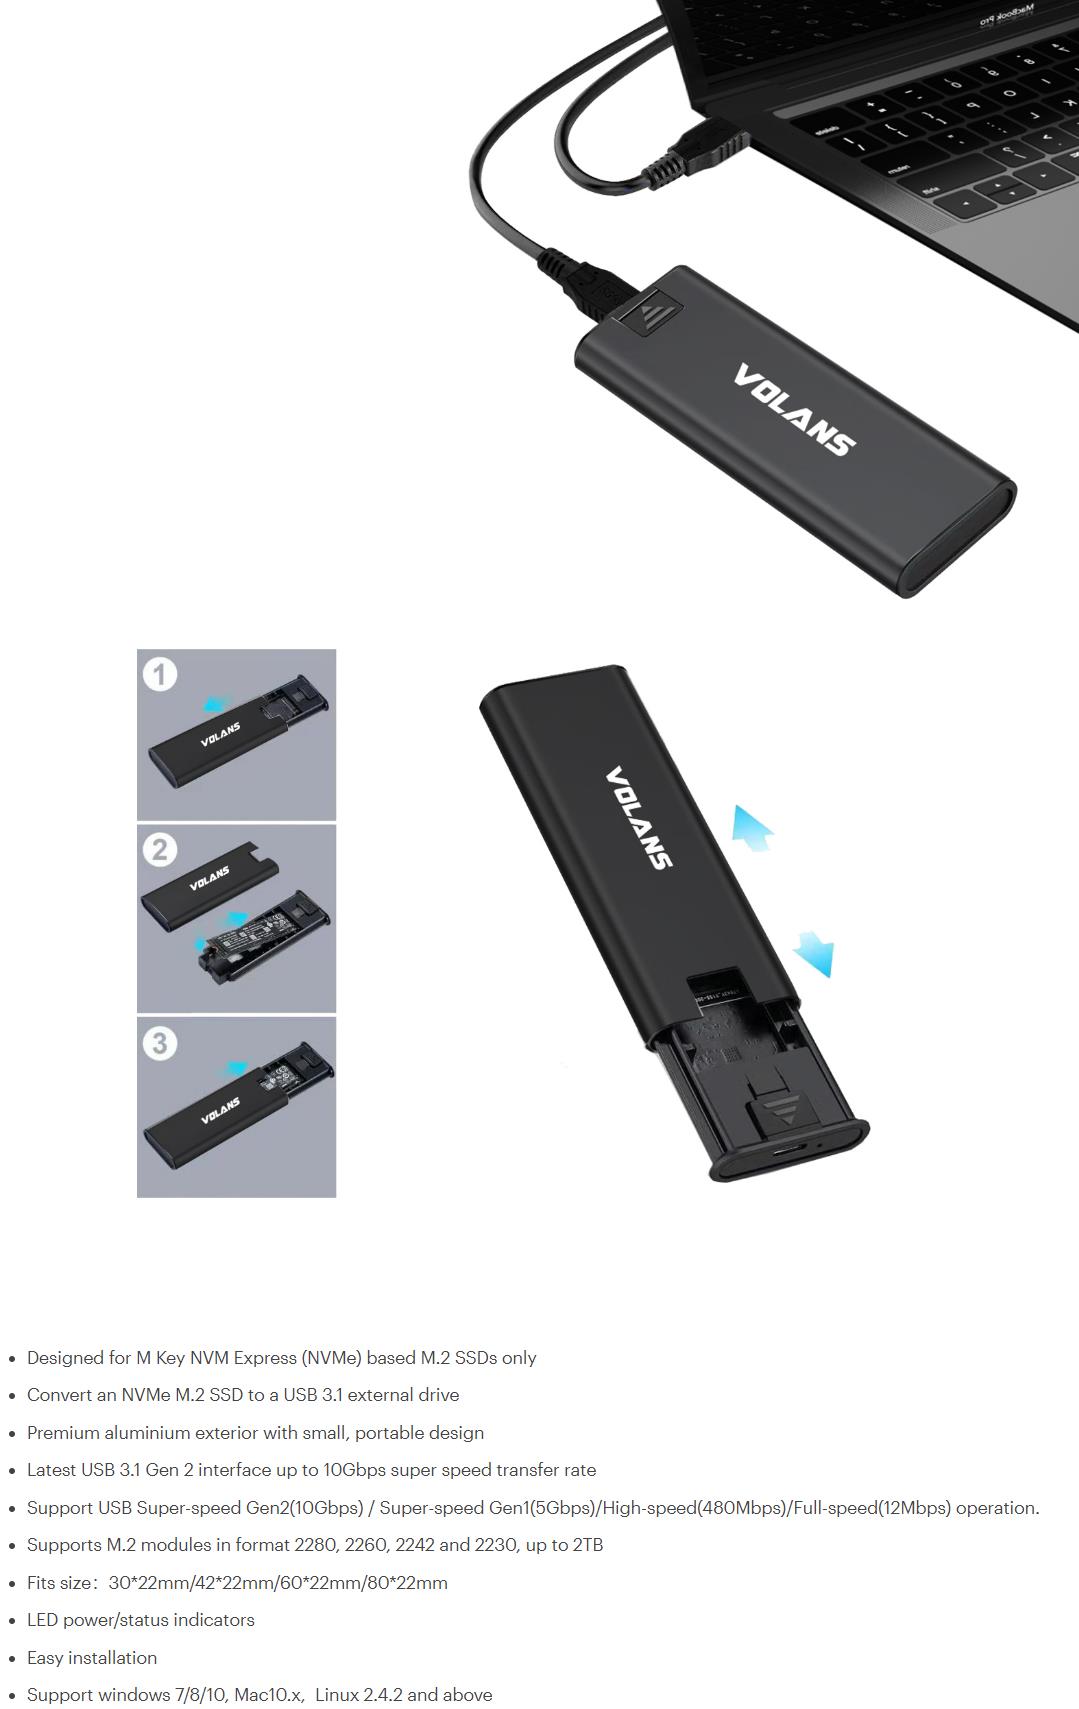 A large marketing image providing additional information about the product Volans Aluminium NVMe PCIe M.2 SSD to USB3.1 Gen 2 Type C Enclosure - Additional alt info not provided